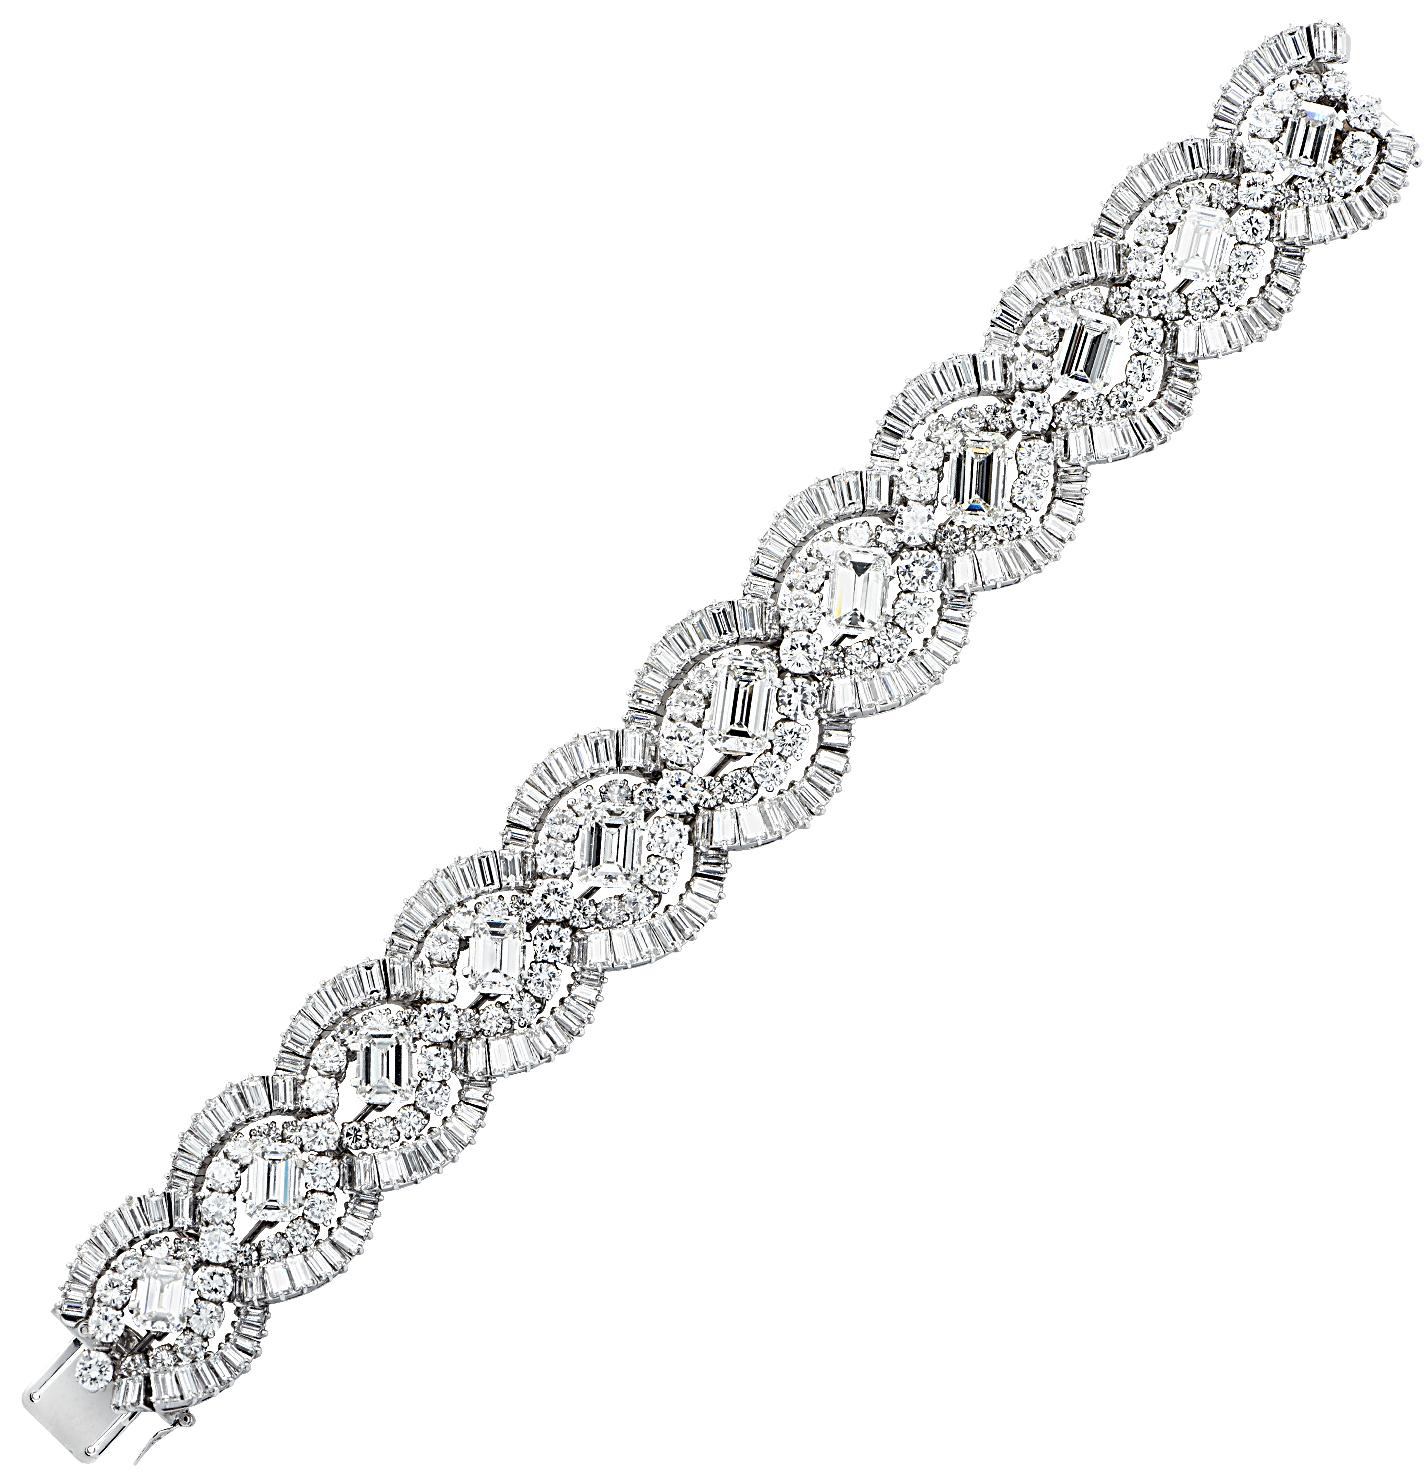 Sensational French diamond bracelet circa 1960, crafted in platinum, showcasing 58.66 carats of round brilliant cut, baguette cut and emerald cut diamonds weighing approximately 58.66 carats total, G-J color, VVS1-SI1 carats. Round brilliant cut and